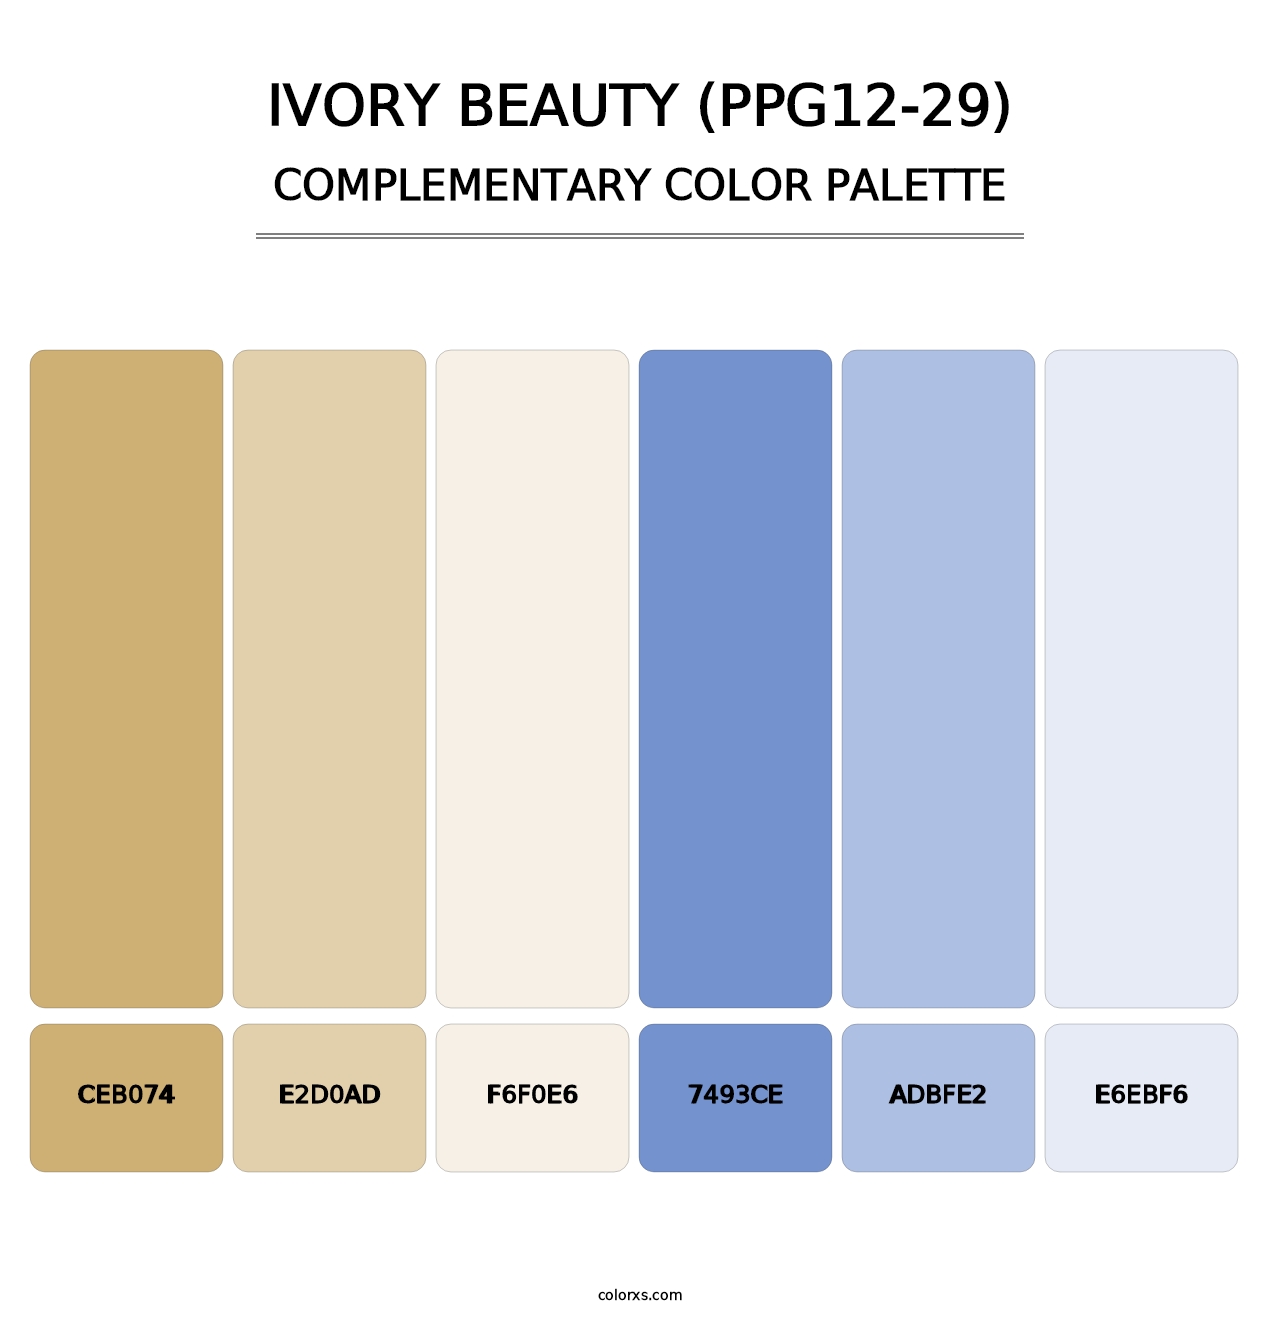 Ivory Beauty (PPG12-29) - Complementary Color Palette